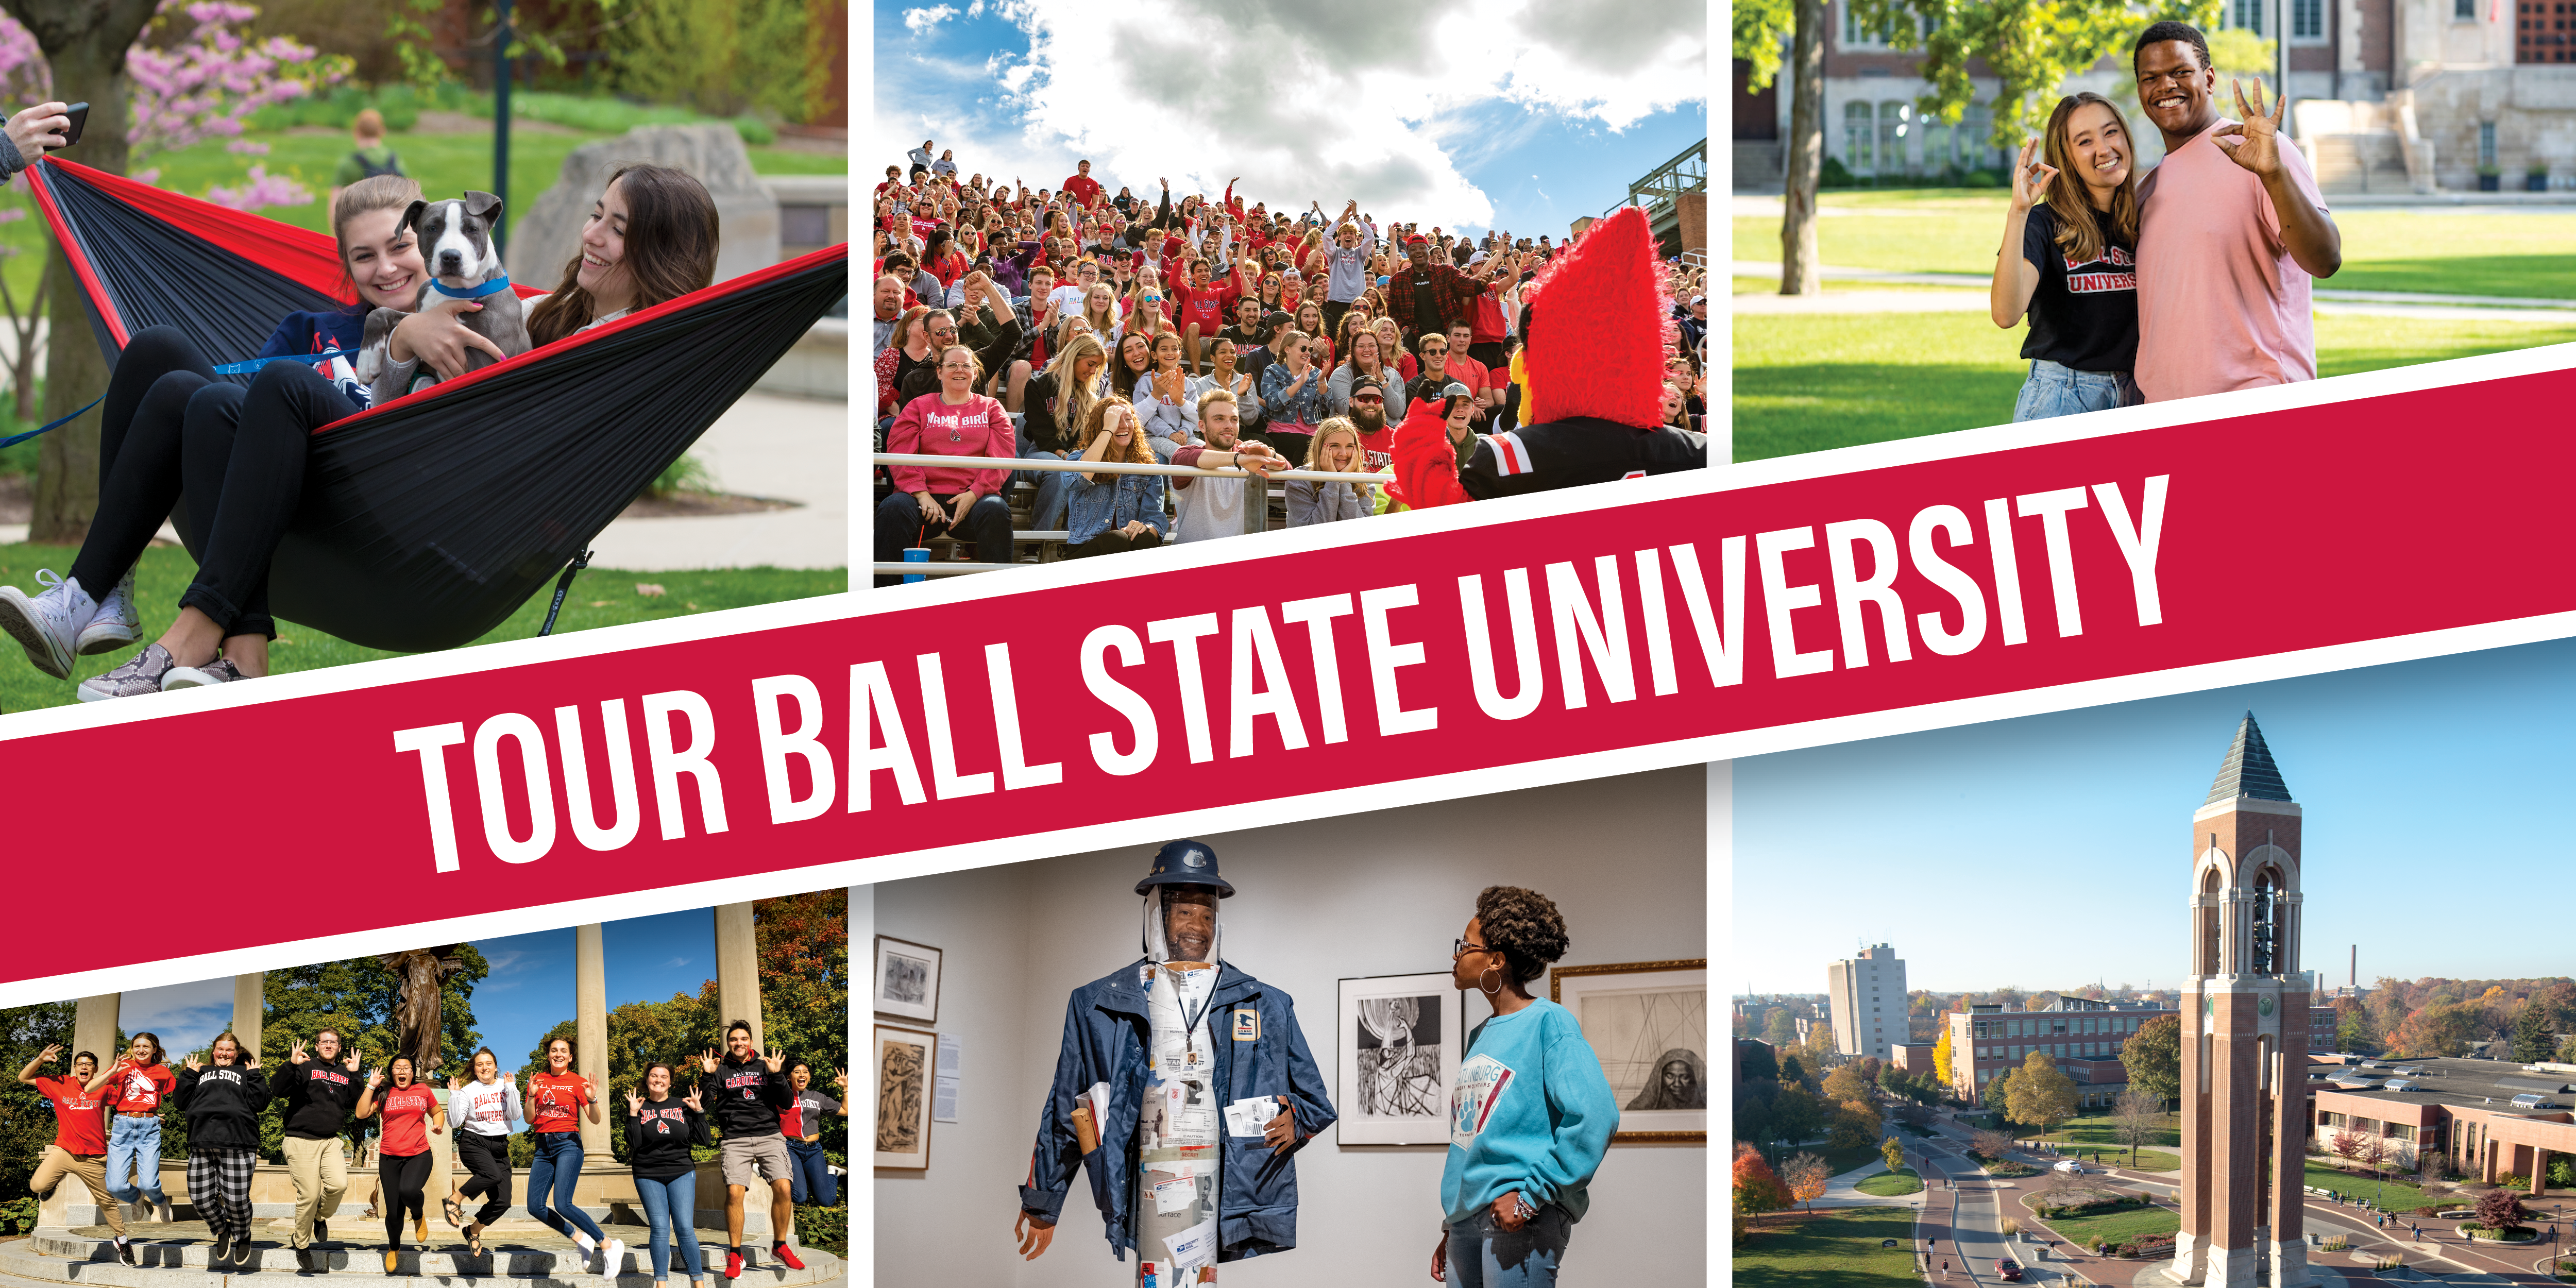 Collage of pictures that show various activities and landmarks around campus with text reading "Tour Ball State University."